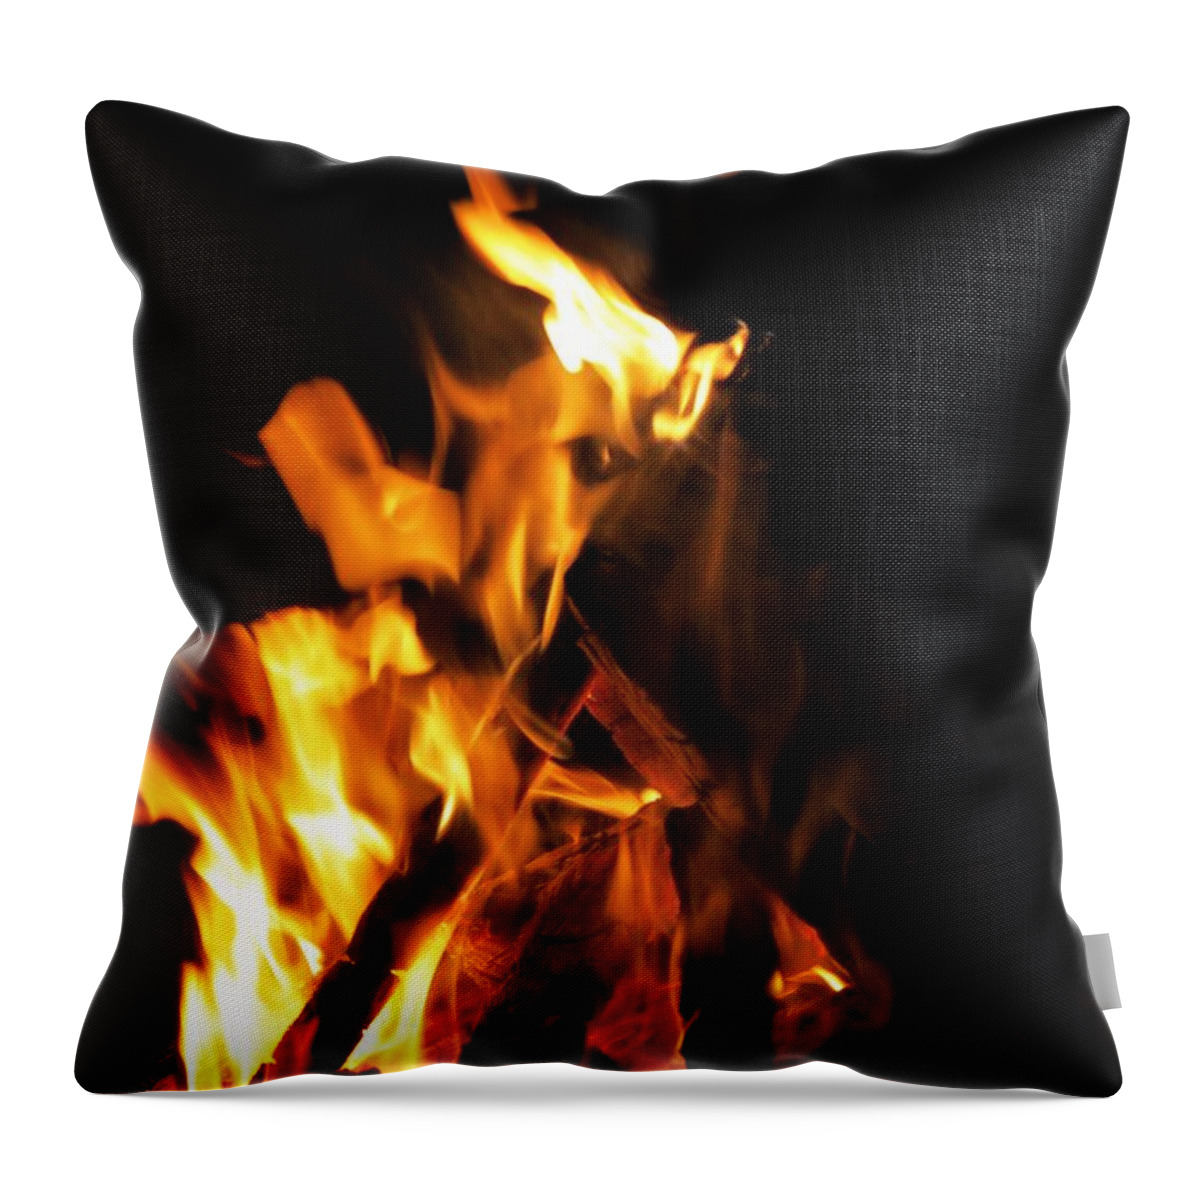 Fire Throw Pillow featuring the photograph Face in the Fire by Azthet Photography